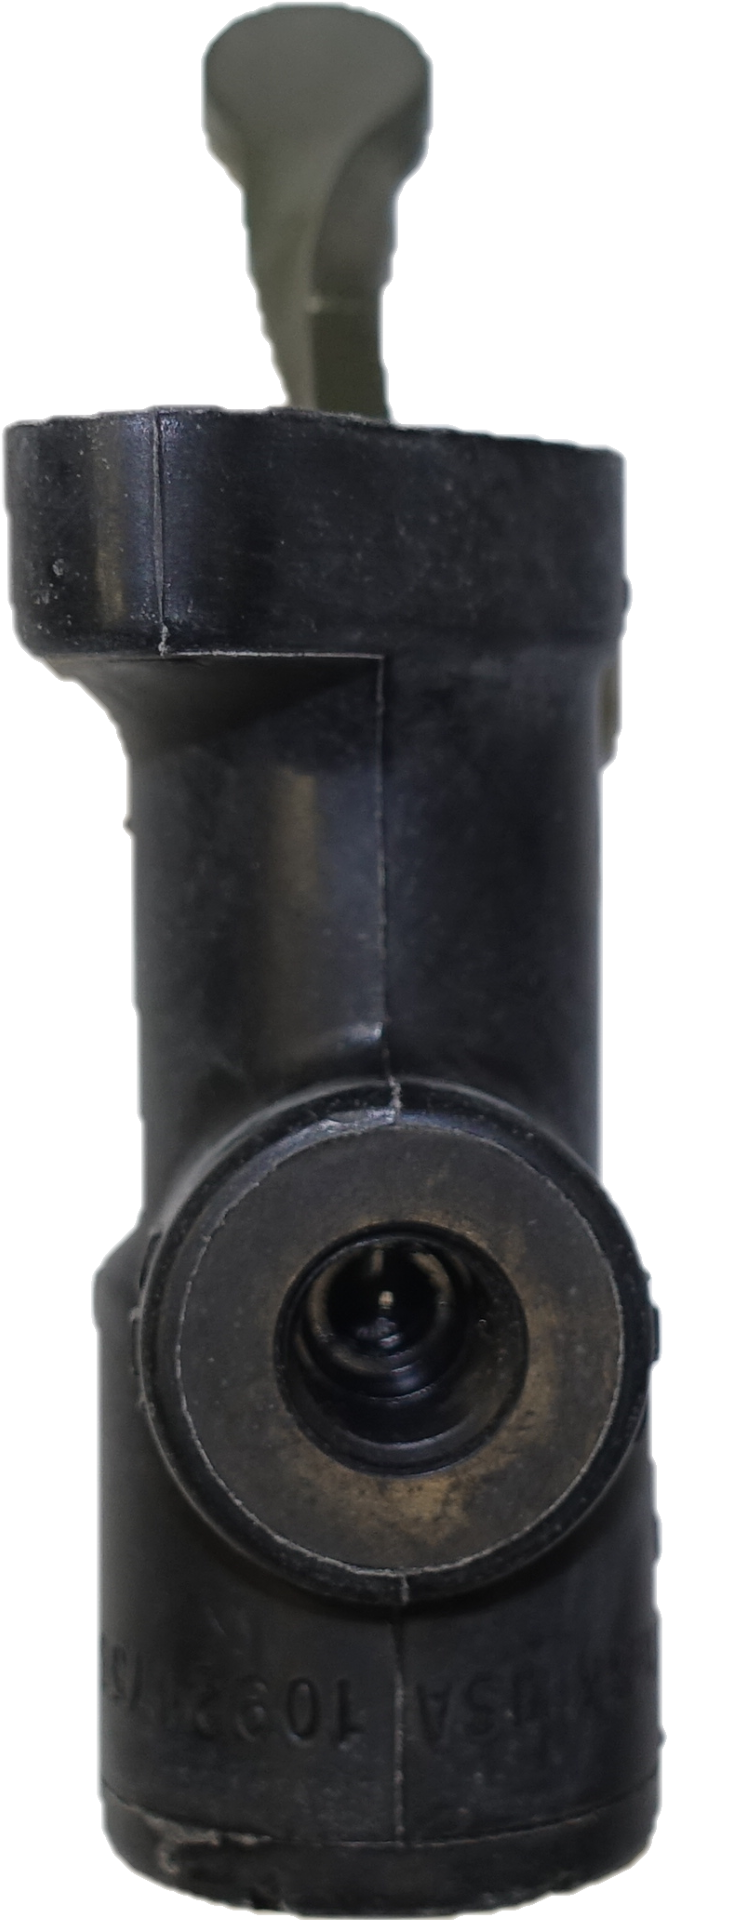 COM-3222 | COM-3222 Transfercase Air Actuating Switch (3) (Large).png